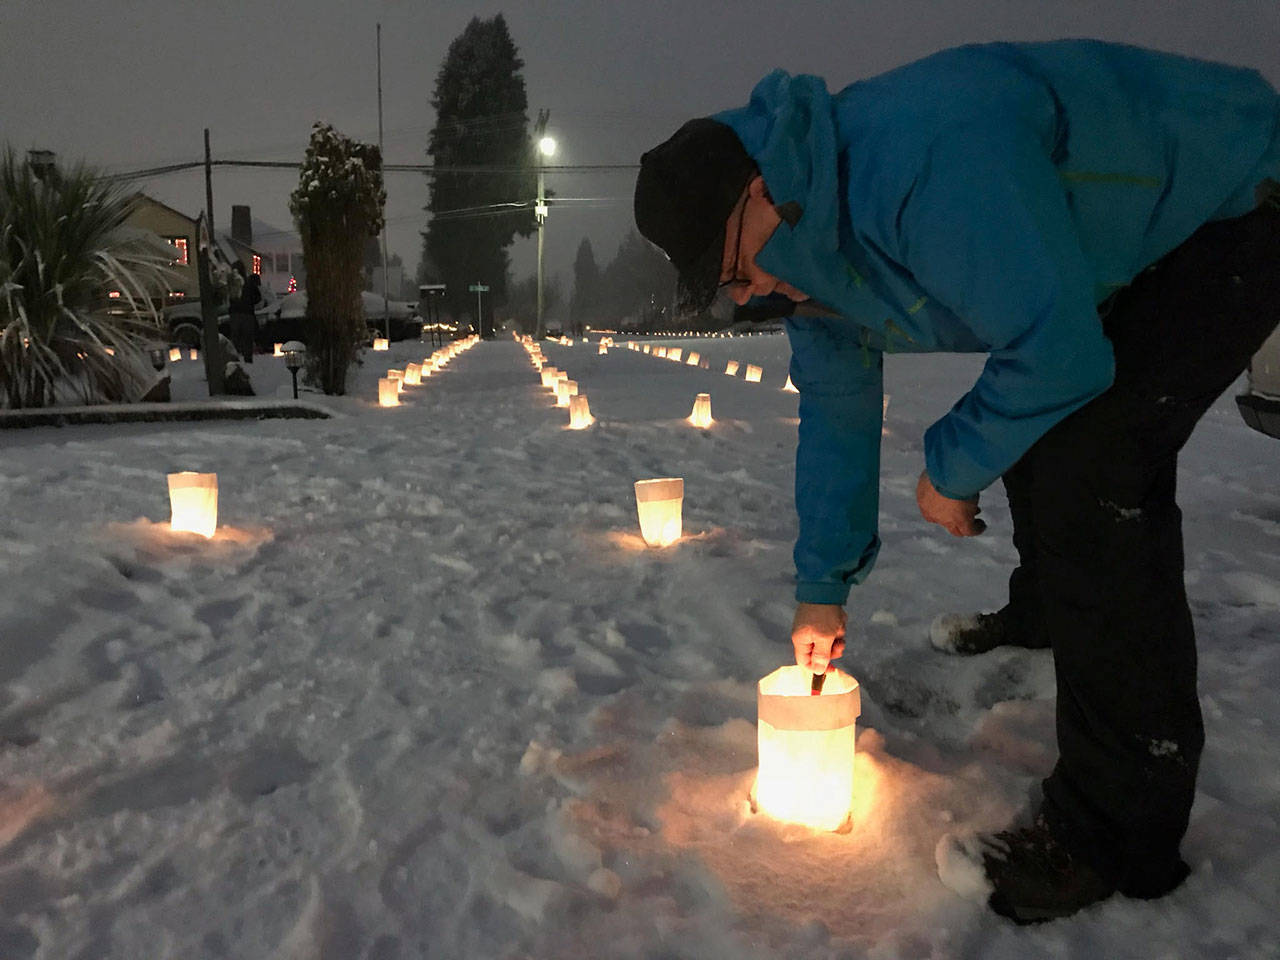 Pat Bartholick joined others in his East Second Street neighborhood in Port Angeles on Christmas Eve to light luminaries as part of a 40-year-old tradition. (Paul Gottlieb/Peninsula Daily News)